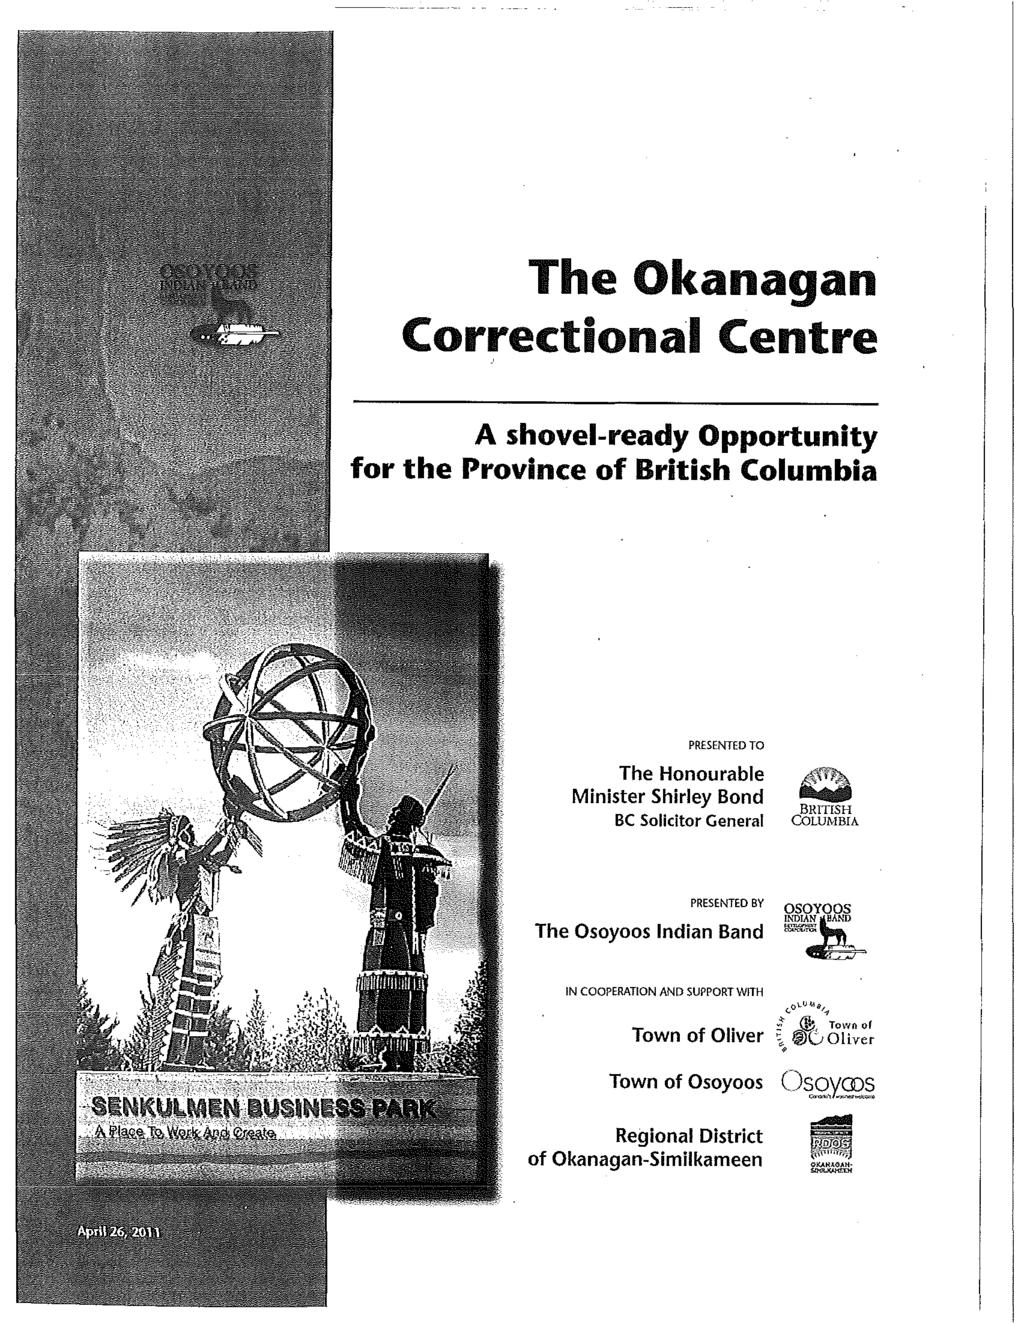 The Okanagan Correctional Centre A shovel-ready Opportunity for the Province of British Columbia PRESENTED TO The Honourable Minister Shirley Bond Be Solicitor General 4(;) BRITISH